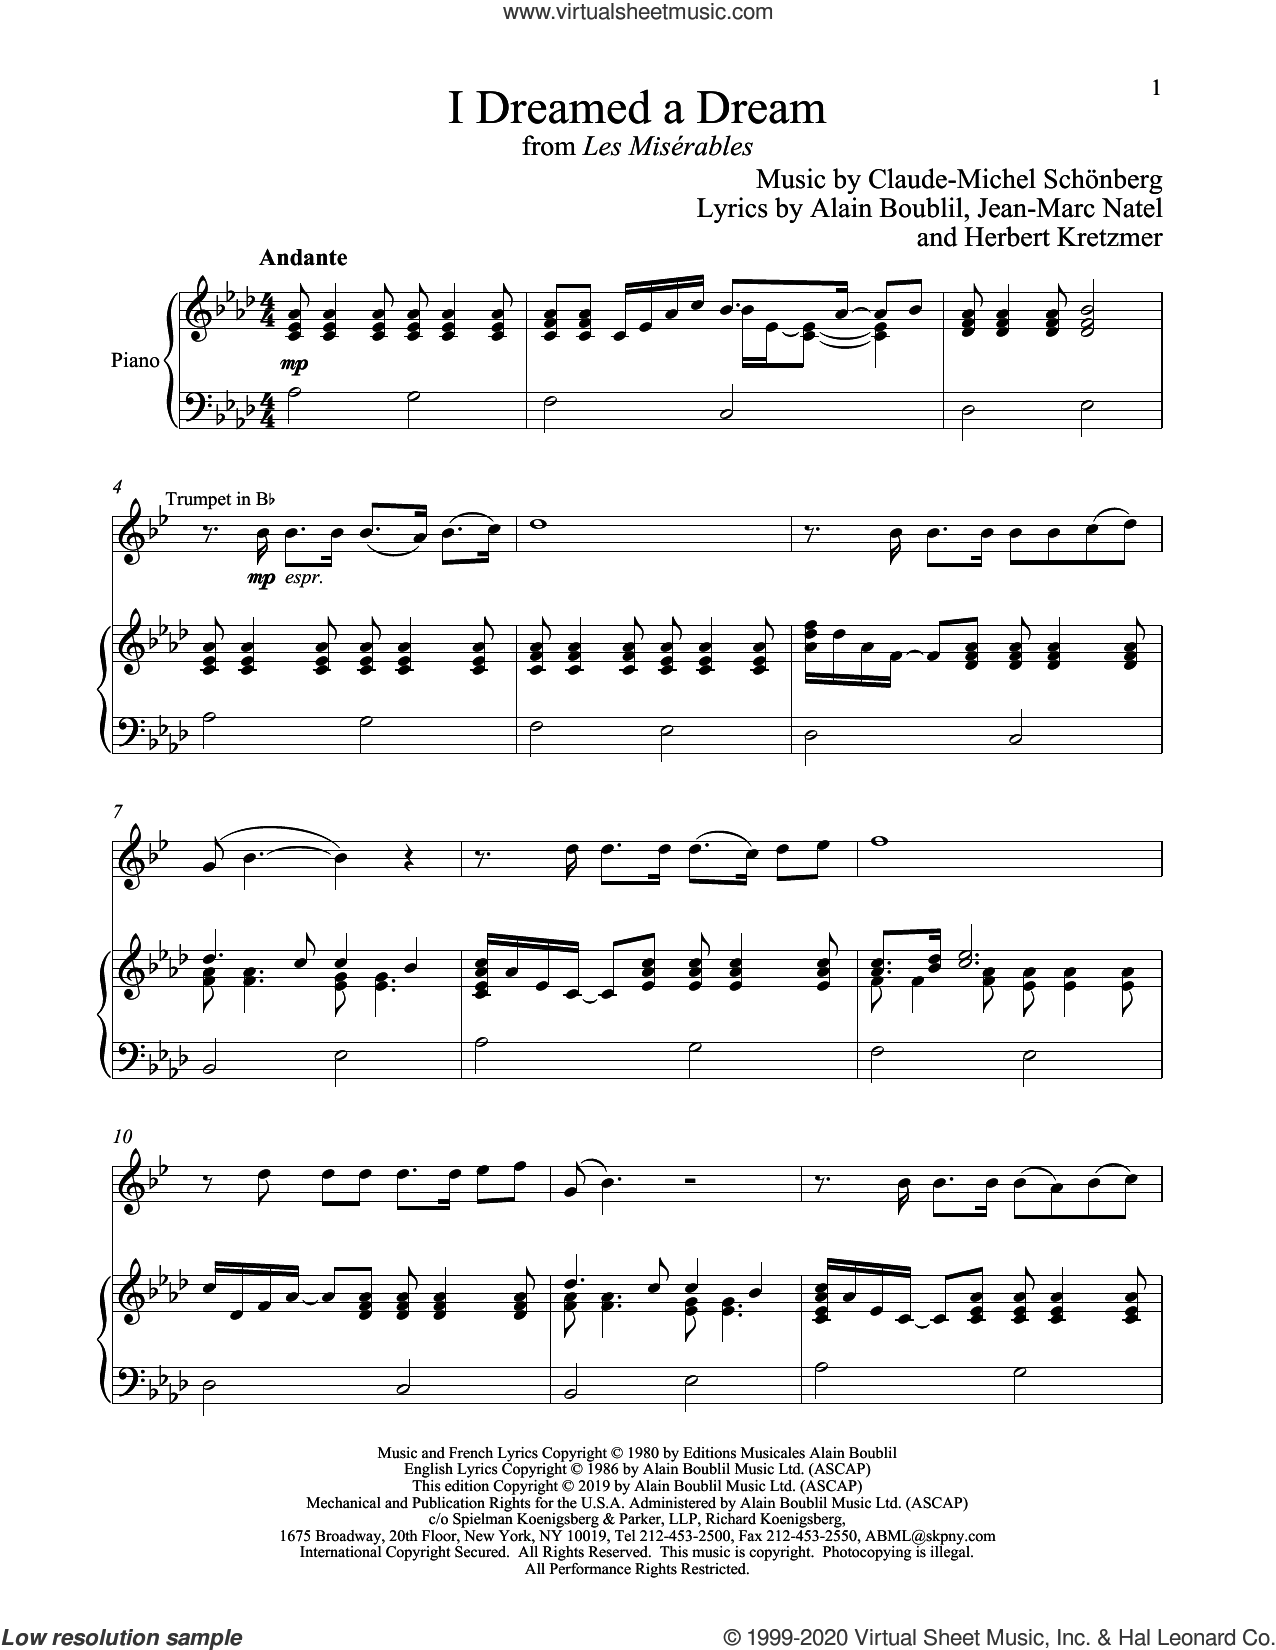 I Dreamed A Dream (from Les Miserables) sheet music for trumpet